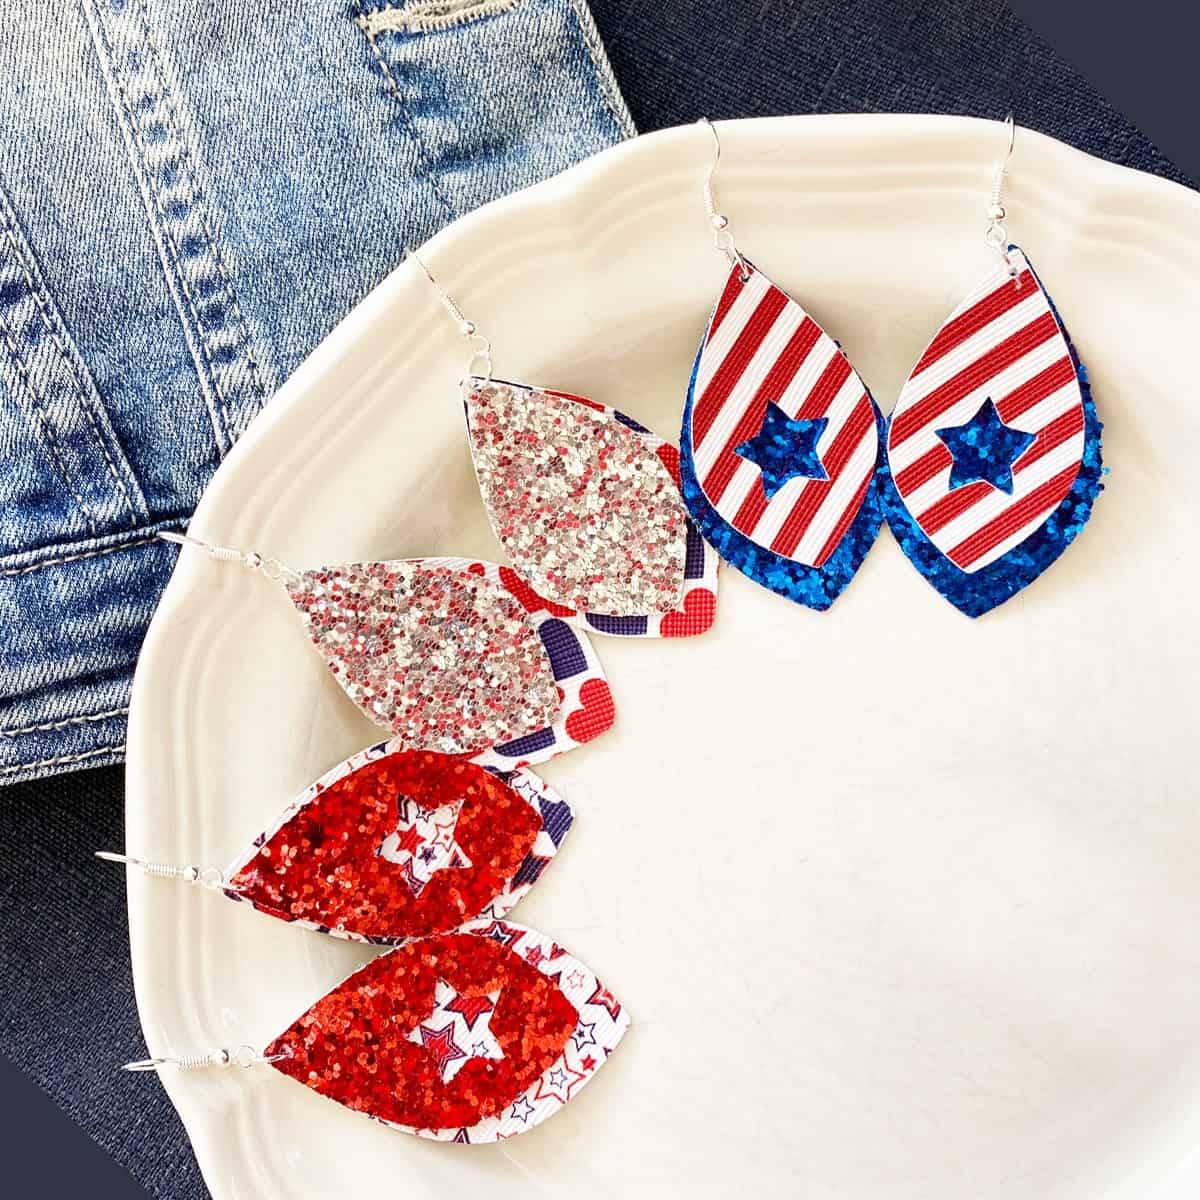 DIY Patriotic Earrings Made with a Cricut